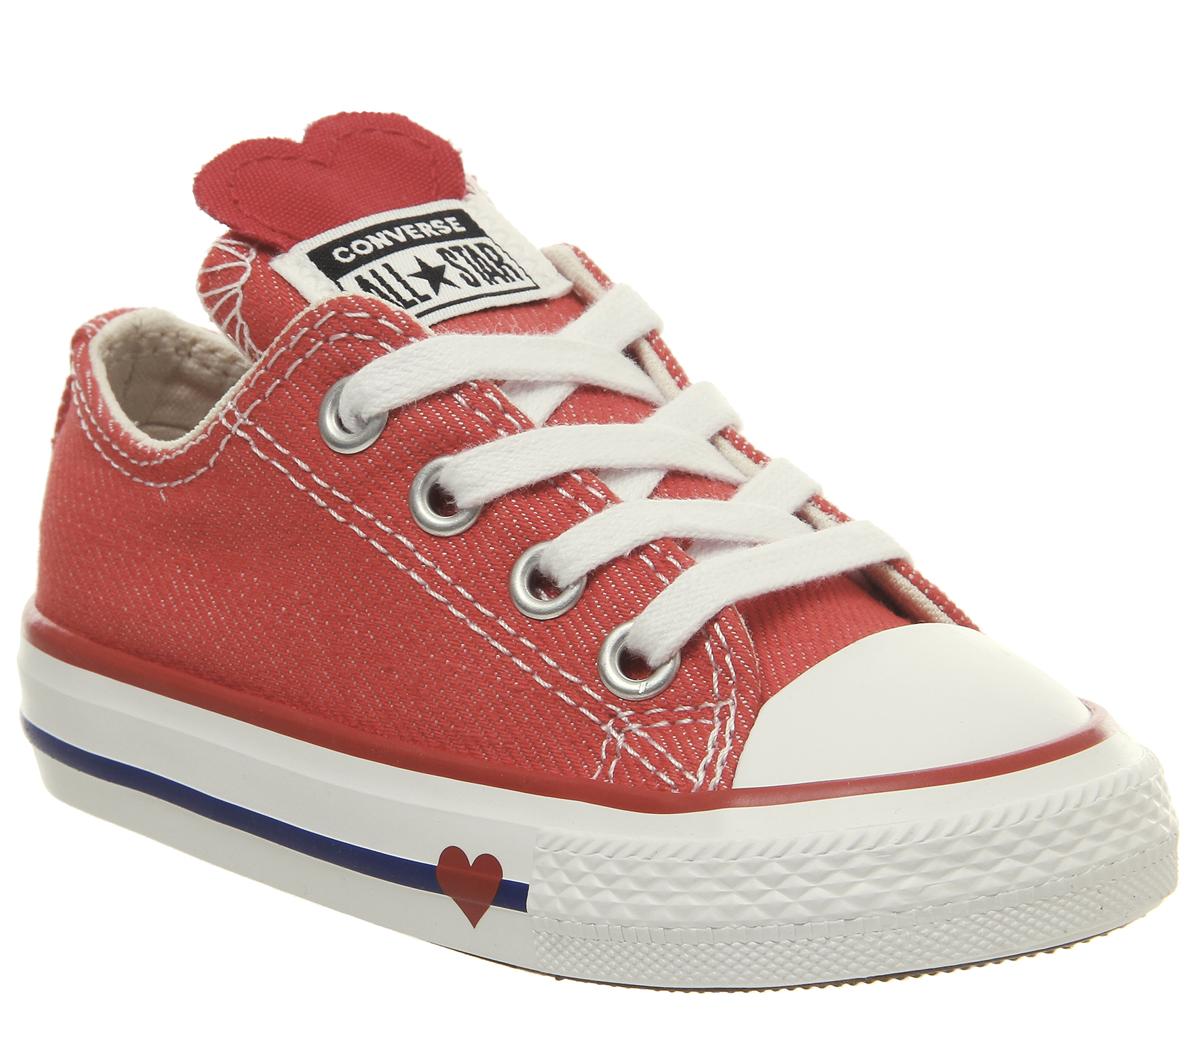 Converse Allstar Low Infant Trainers Red Emamel Red Heart - Unisex